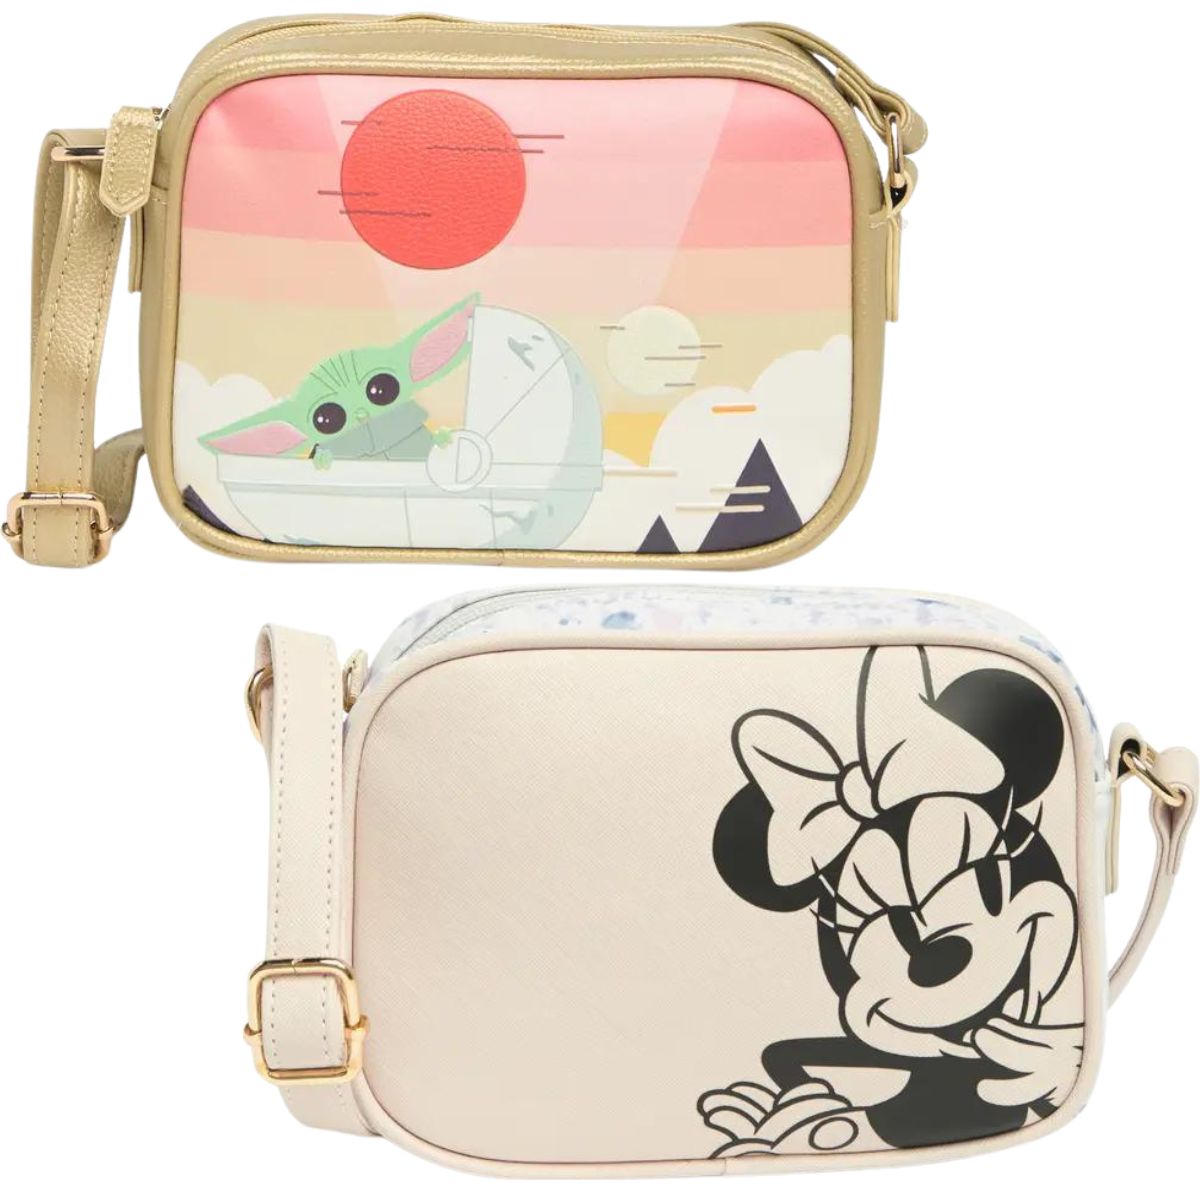 Grogu and Minnie Mouse crossbody bags